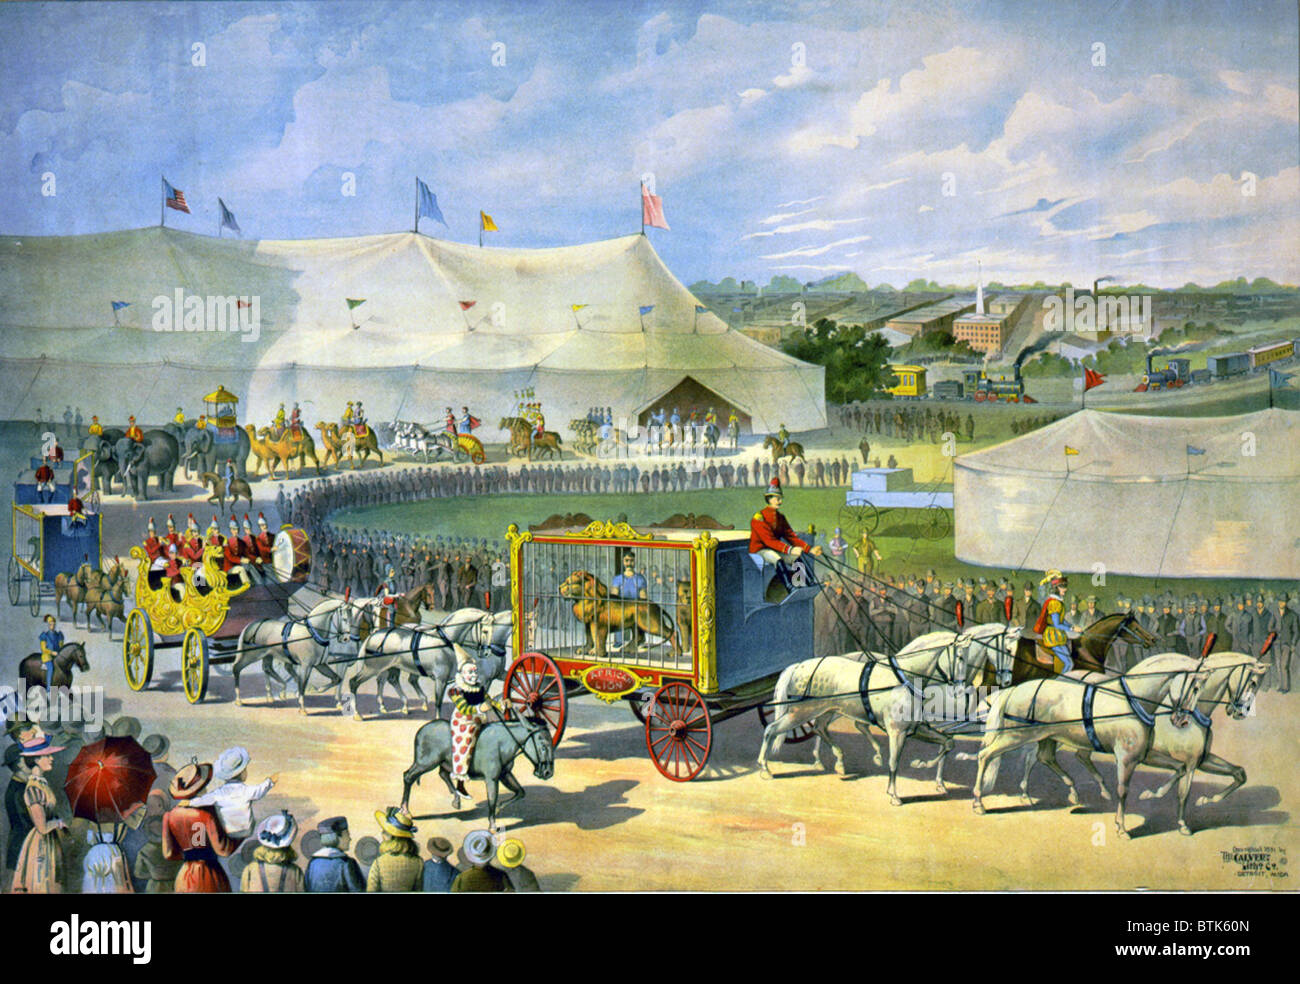 Poster of American circus parade with a caged lion, clowns, elephants, Roman chariots, and camels, with circus tent dominating the background. 1890. Stock Photo